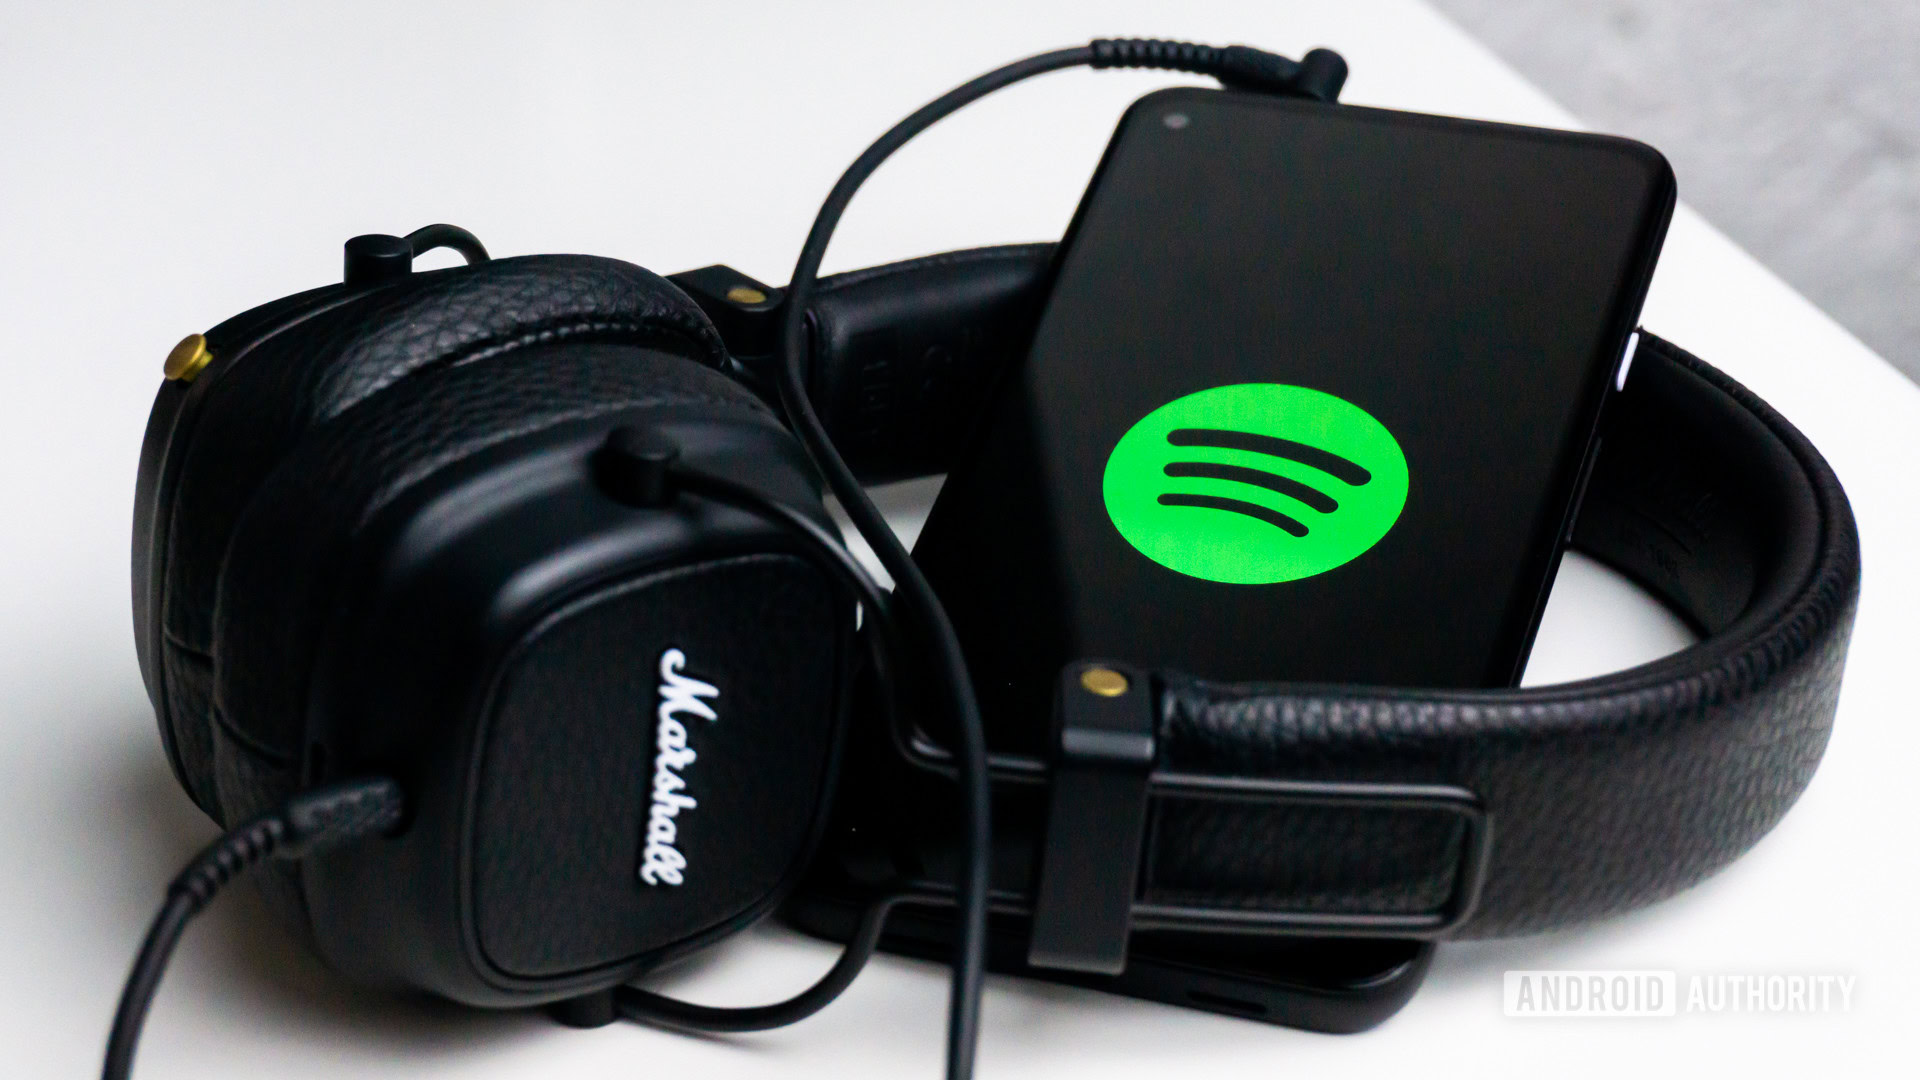 Spotify’s new ‘Basic’ plan in the US is here, and it’s really just the old Premium plan